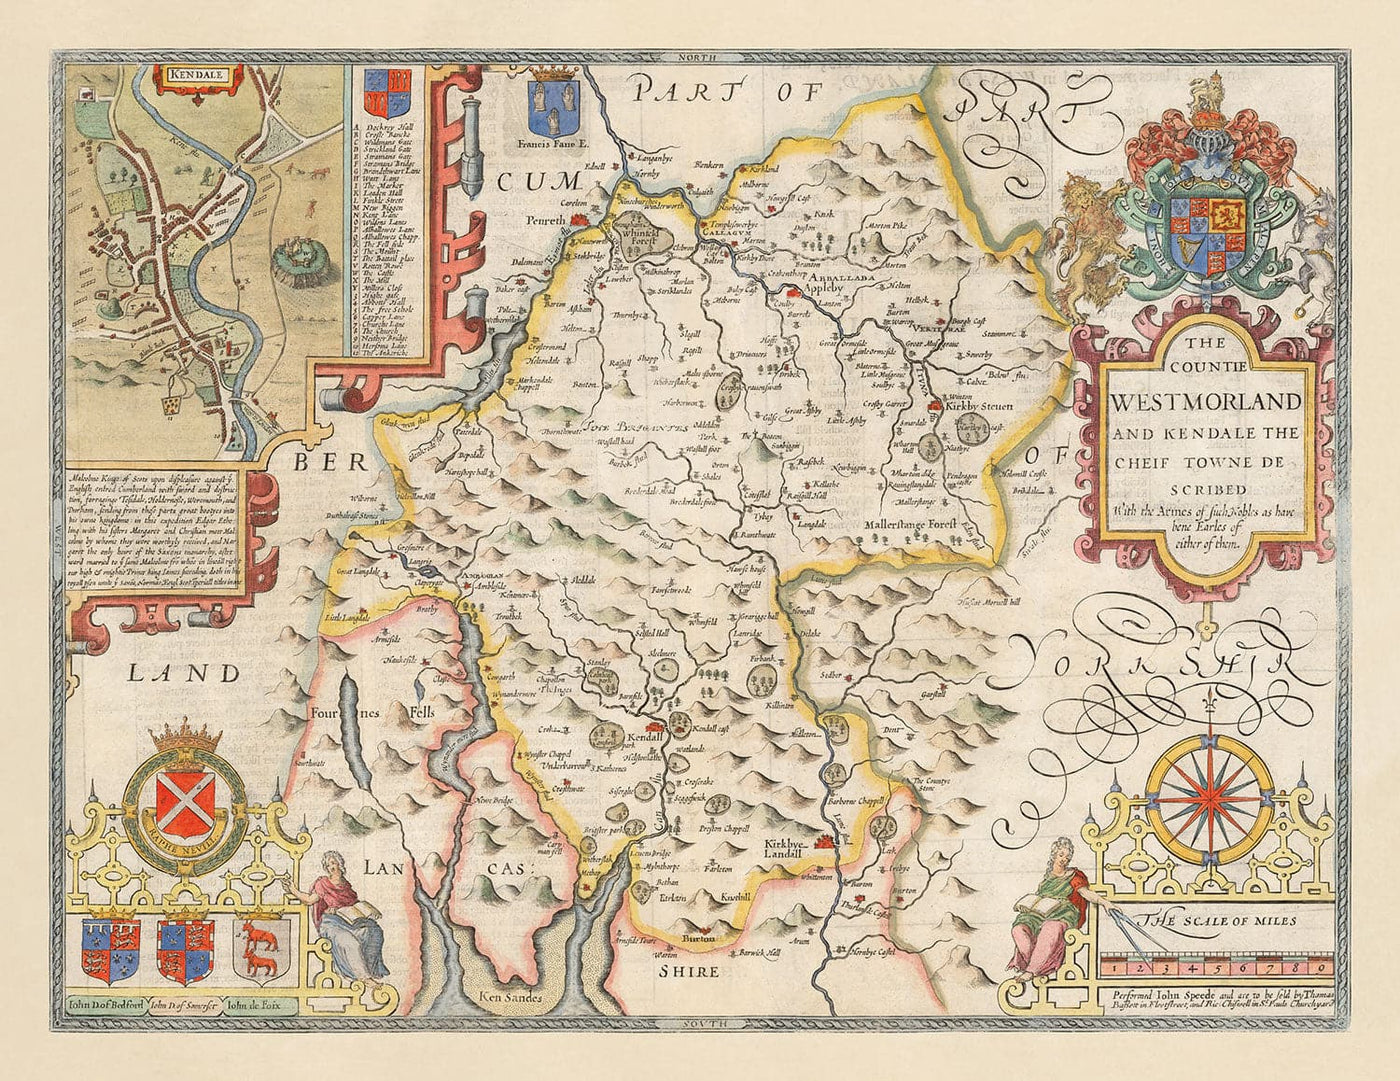 Old Map of Westmorland, 1611 by John Speed - Lake District, Cumbria, Kendal, Windermere, Grasmere